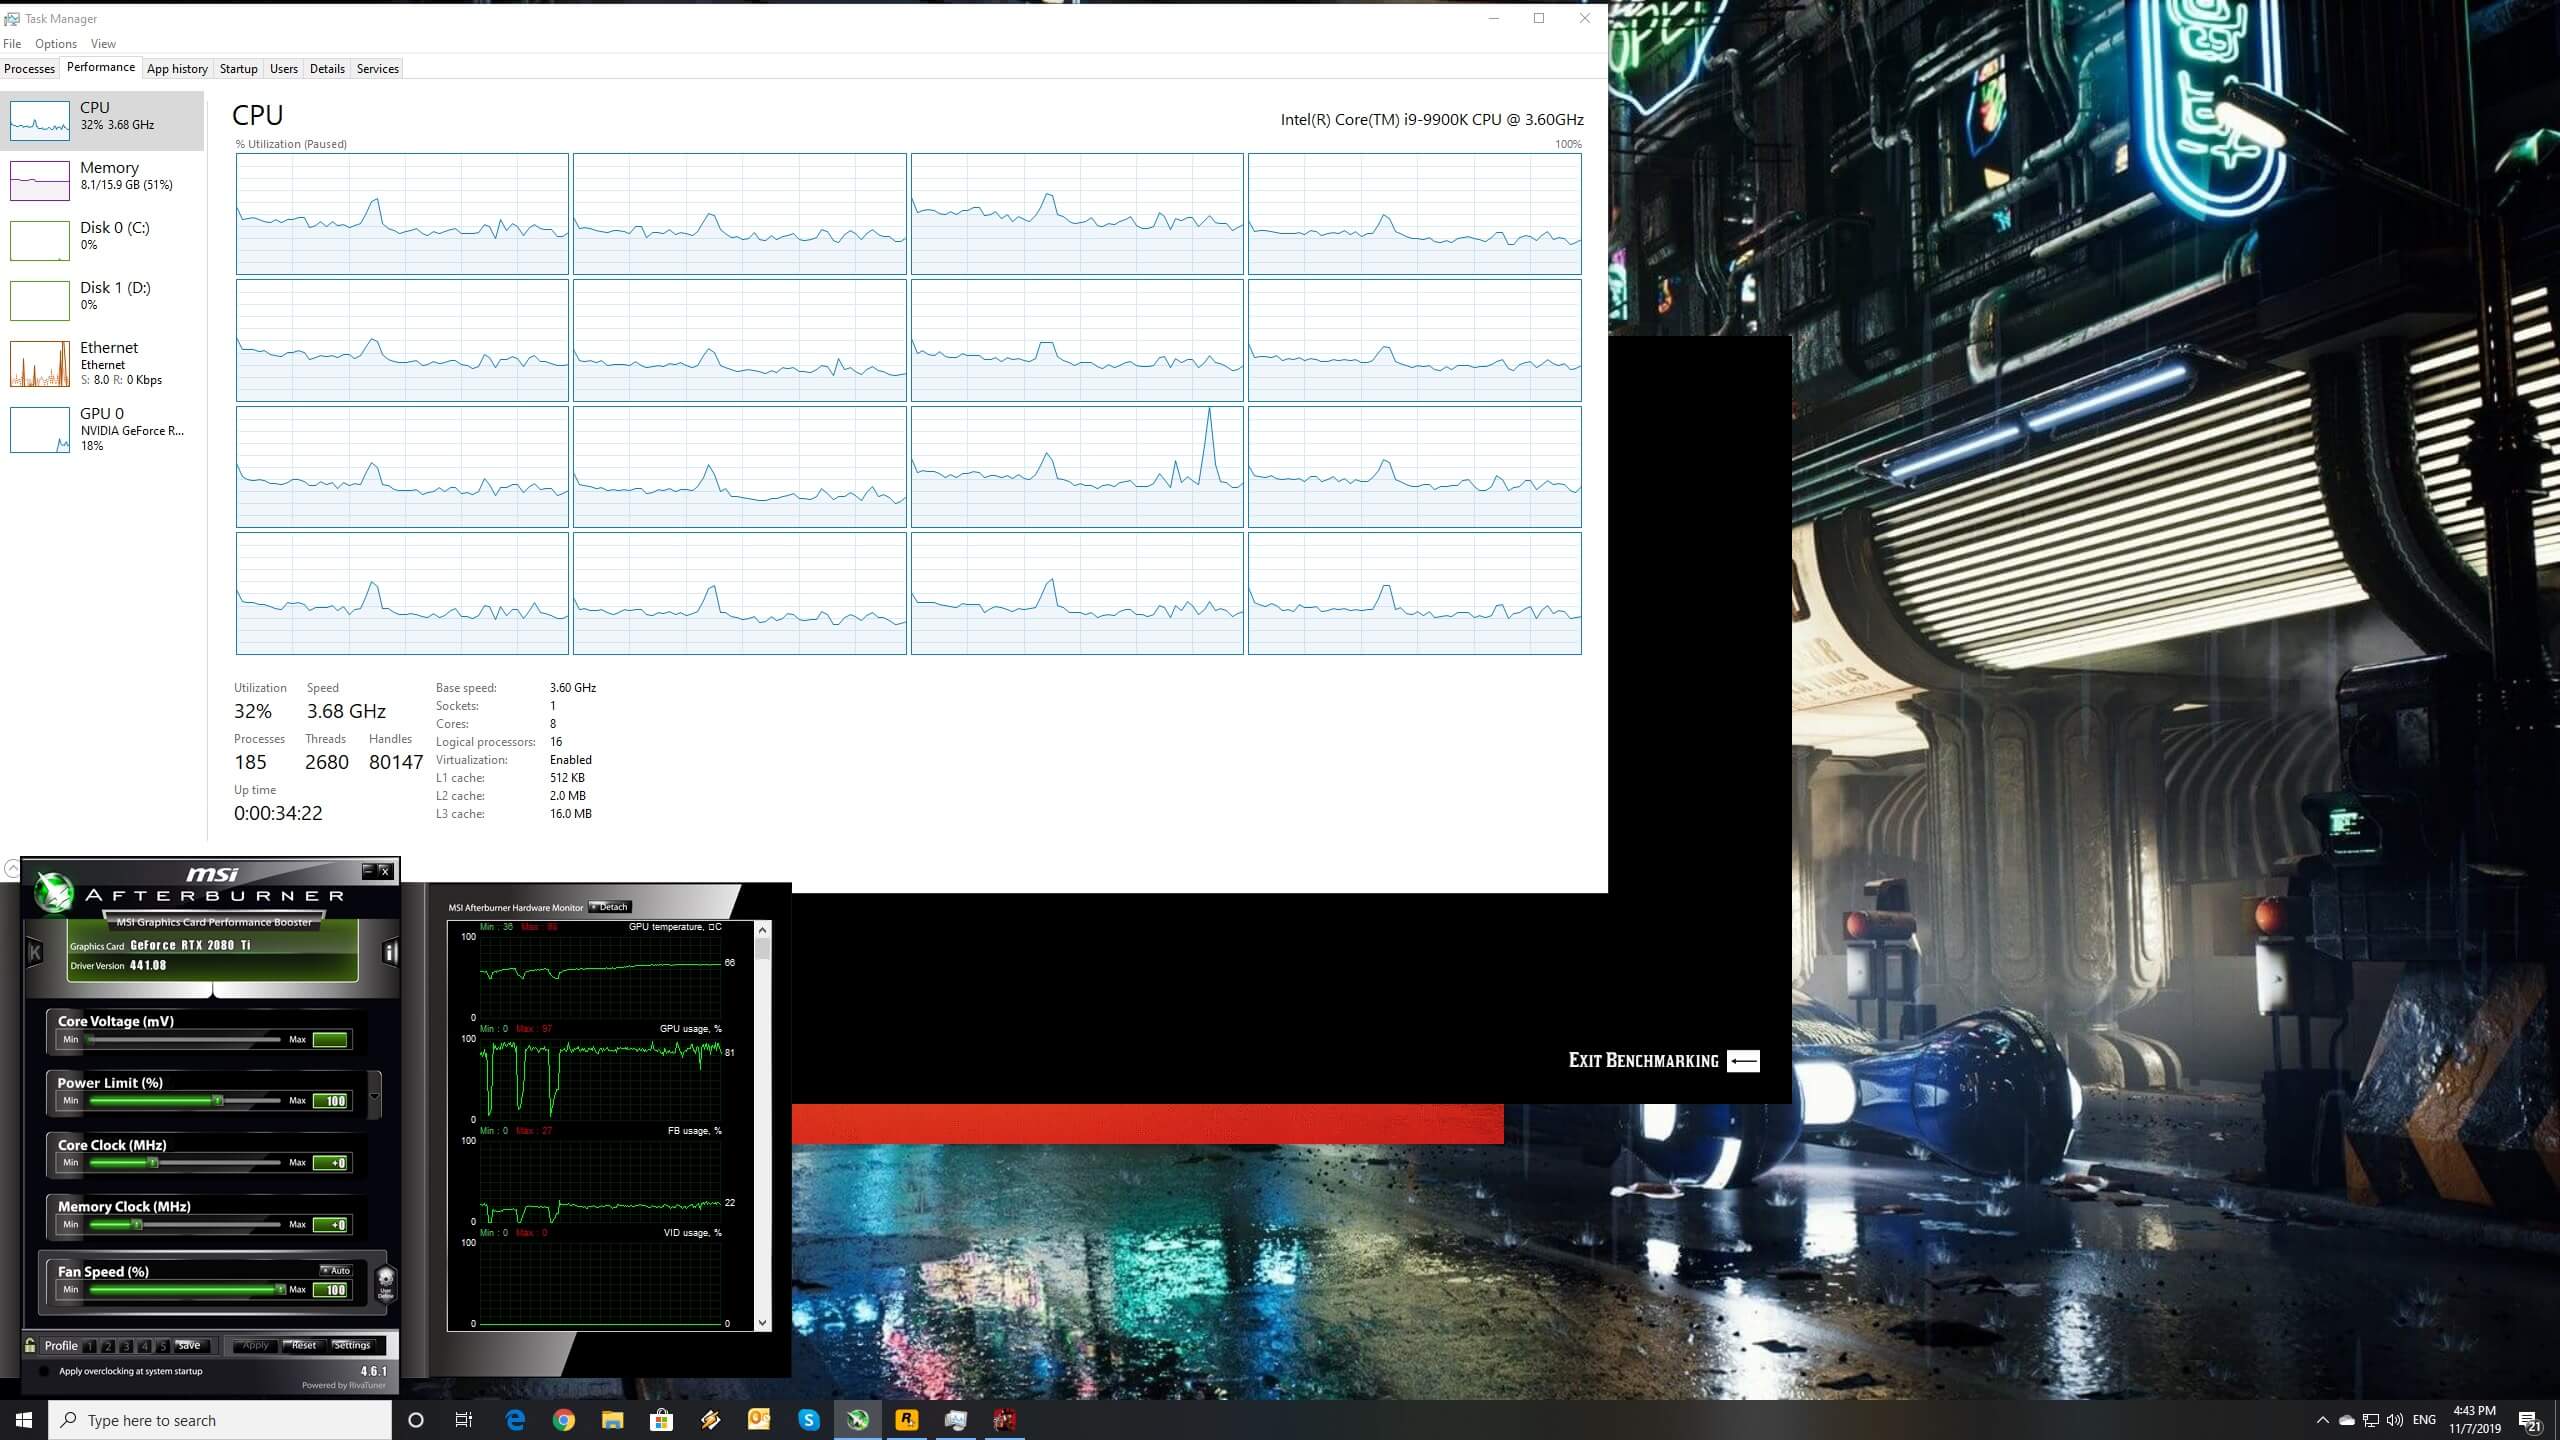 Red Dead Redemption 2 High CPU usage, Low GPU usage. Is this normal? :  PCRedDead